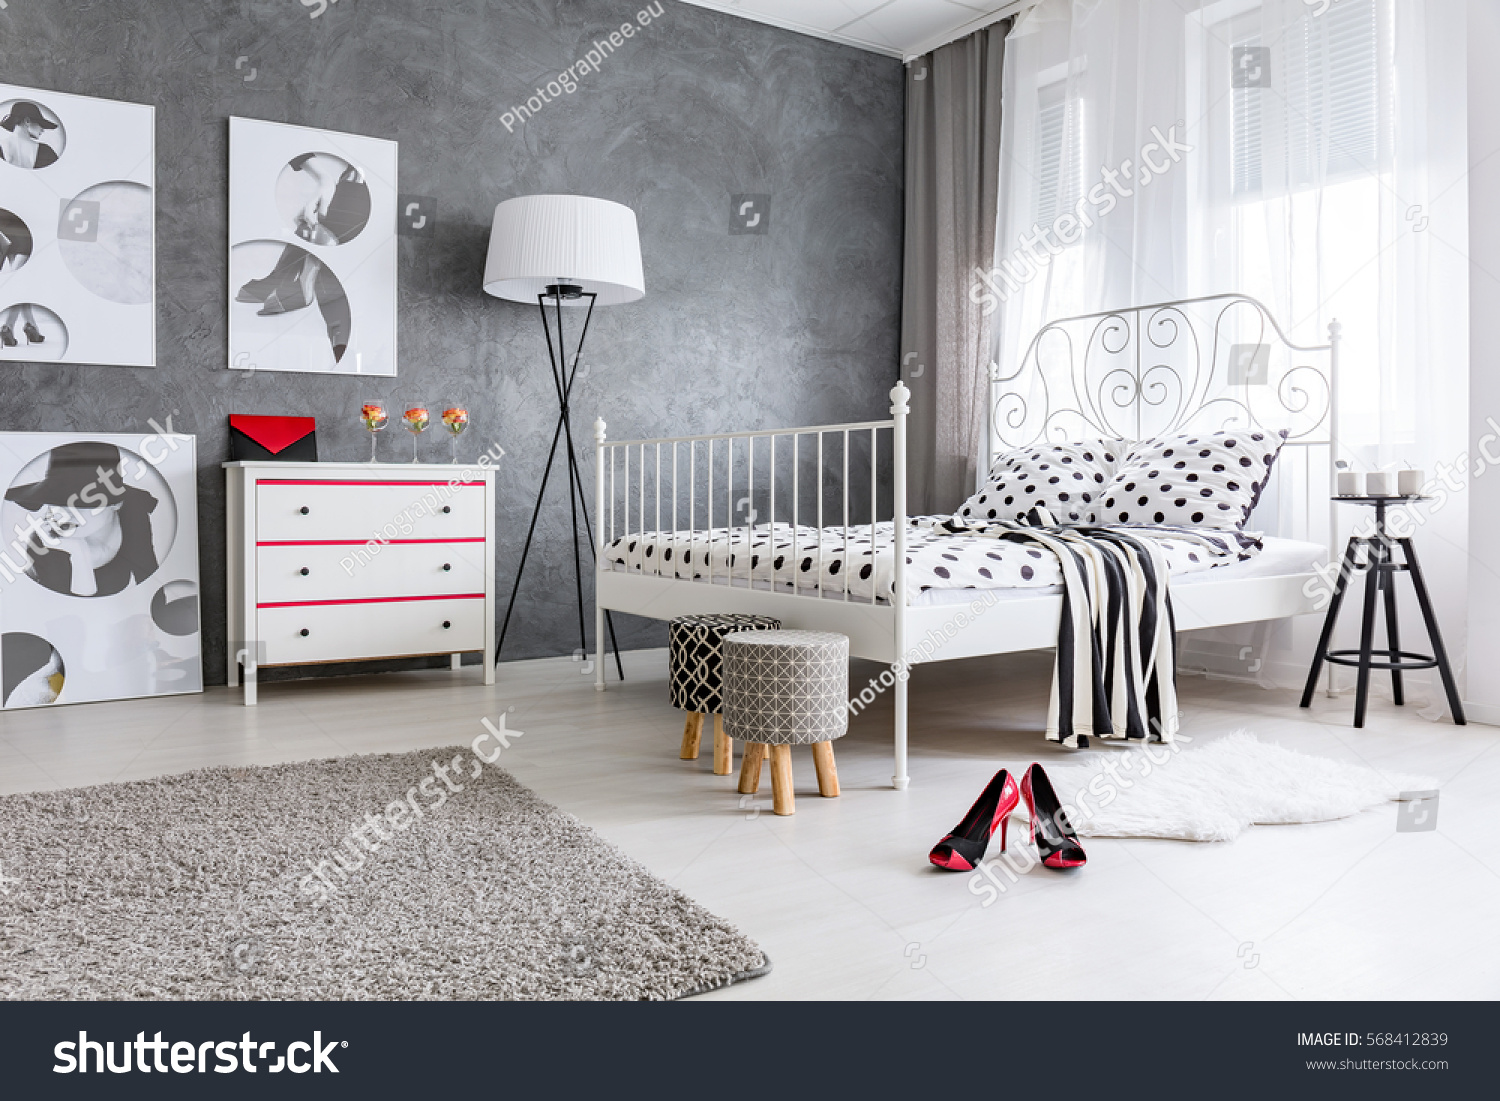 Stylish grey and white bedroom designed for woman #568412839